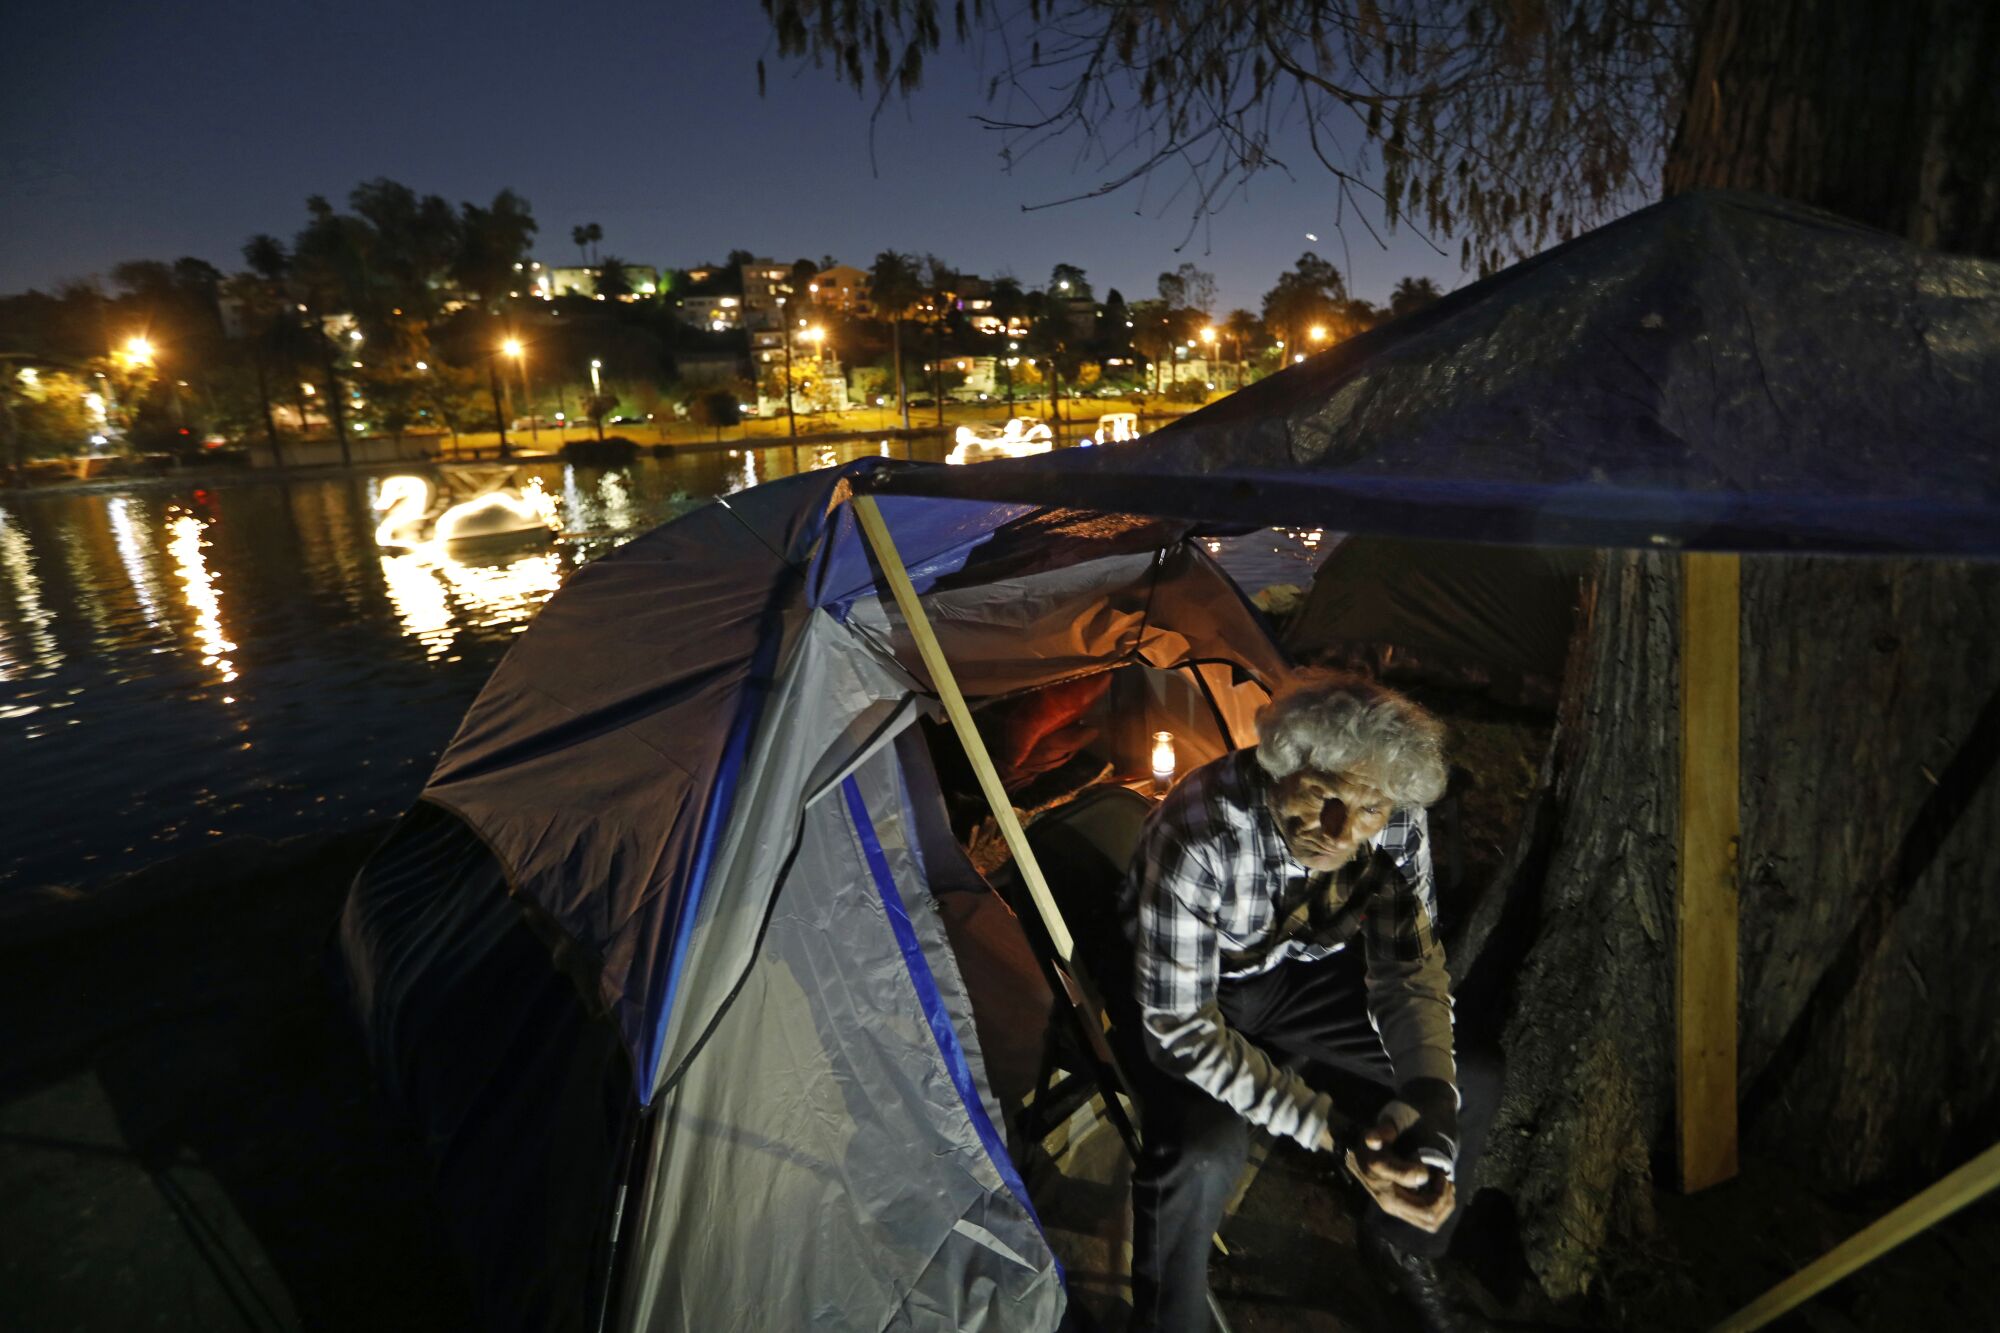 Gene Ostrin, 53, sits in a tent on the edge of Echo Park at night